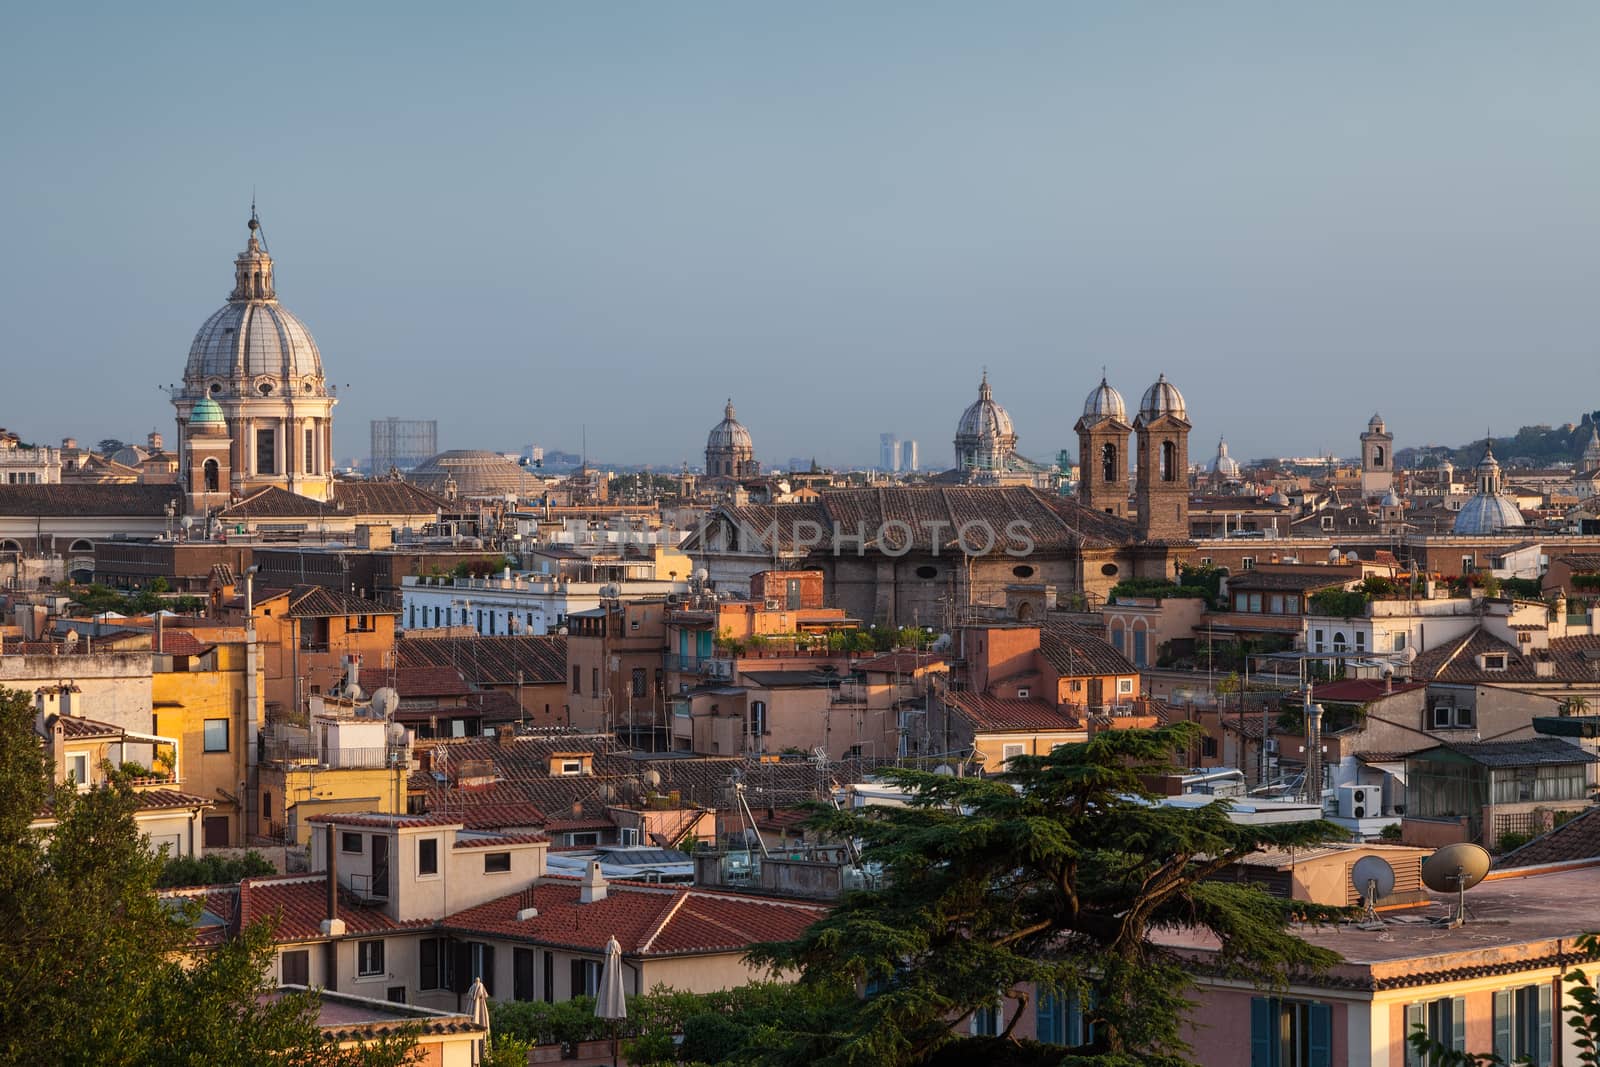 The roofs of Rome in the evening light.